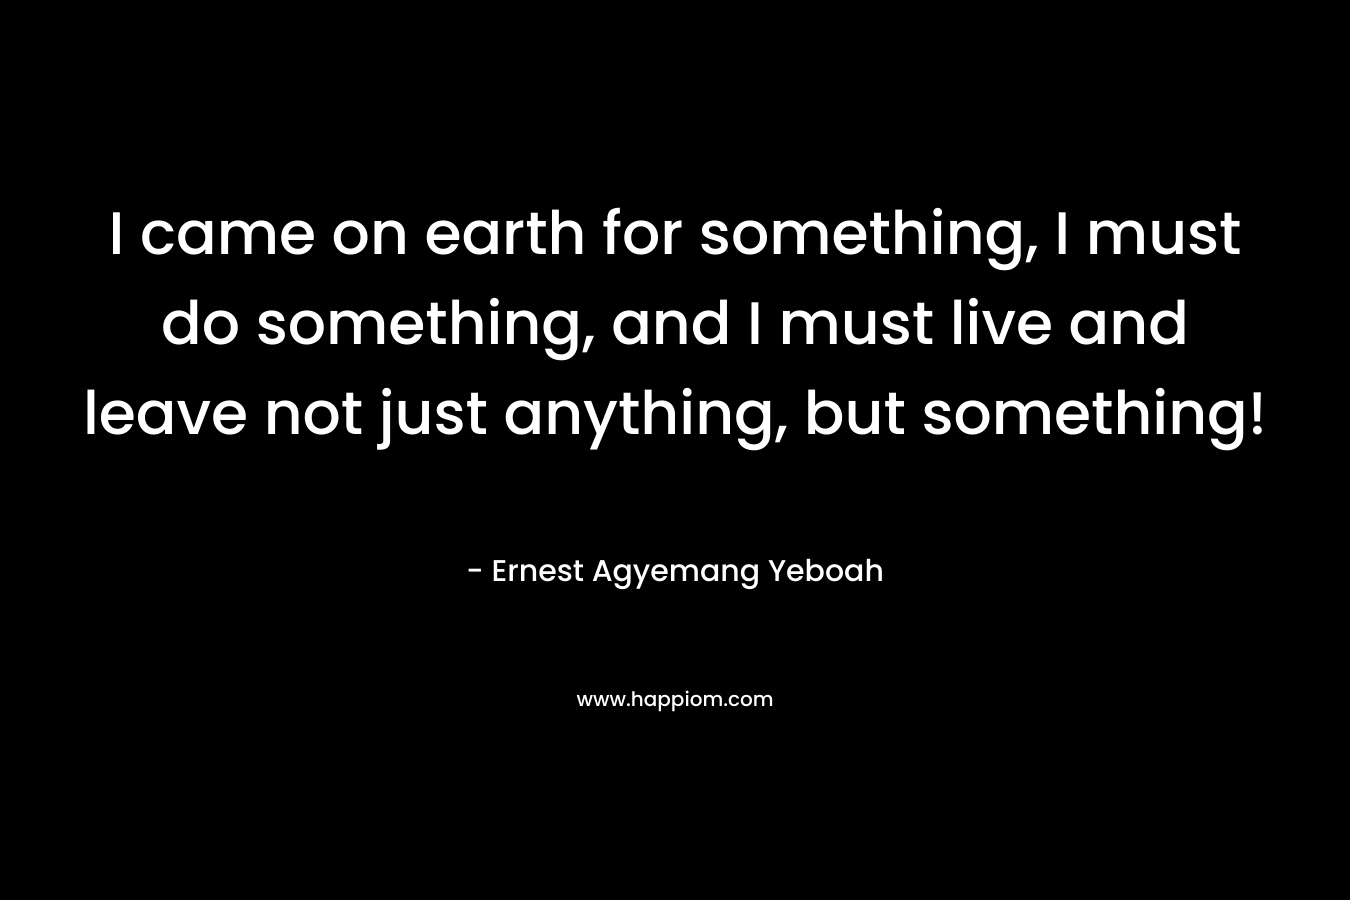 I came on earth for something, I must do something, and I must live and leave not just anything, but something!